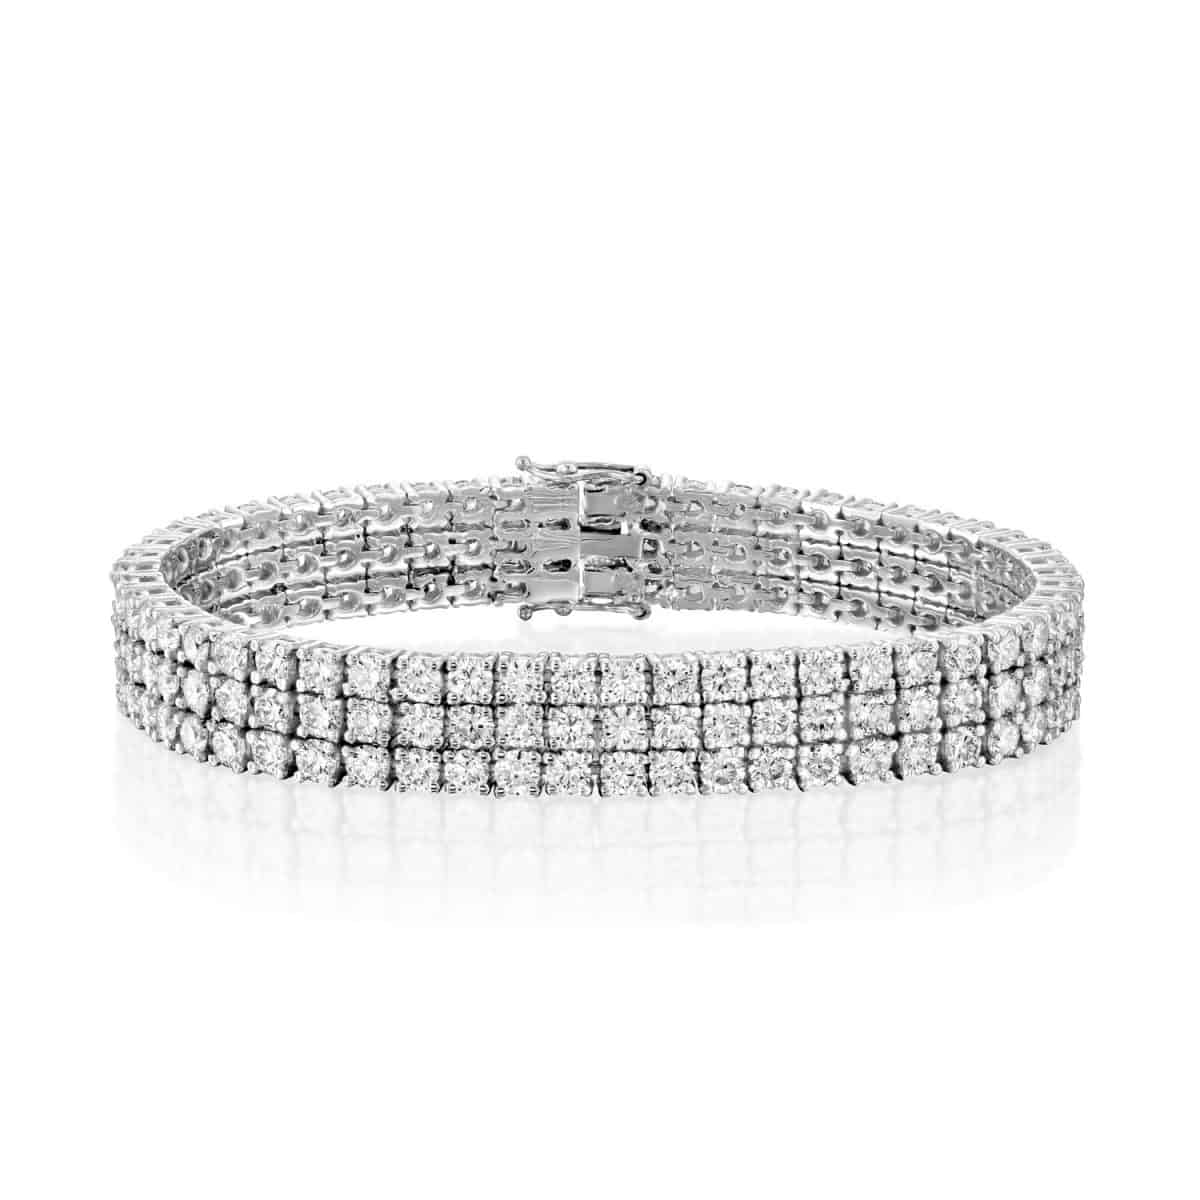 3-row diamond bracelet weighing about 25 carats